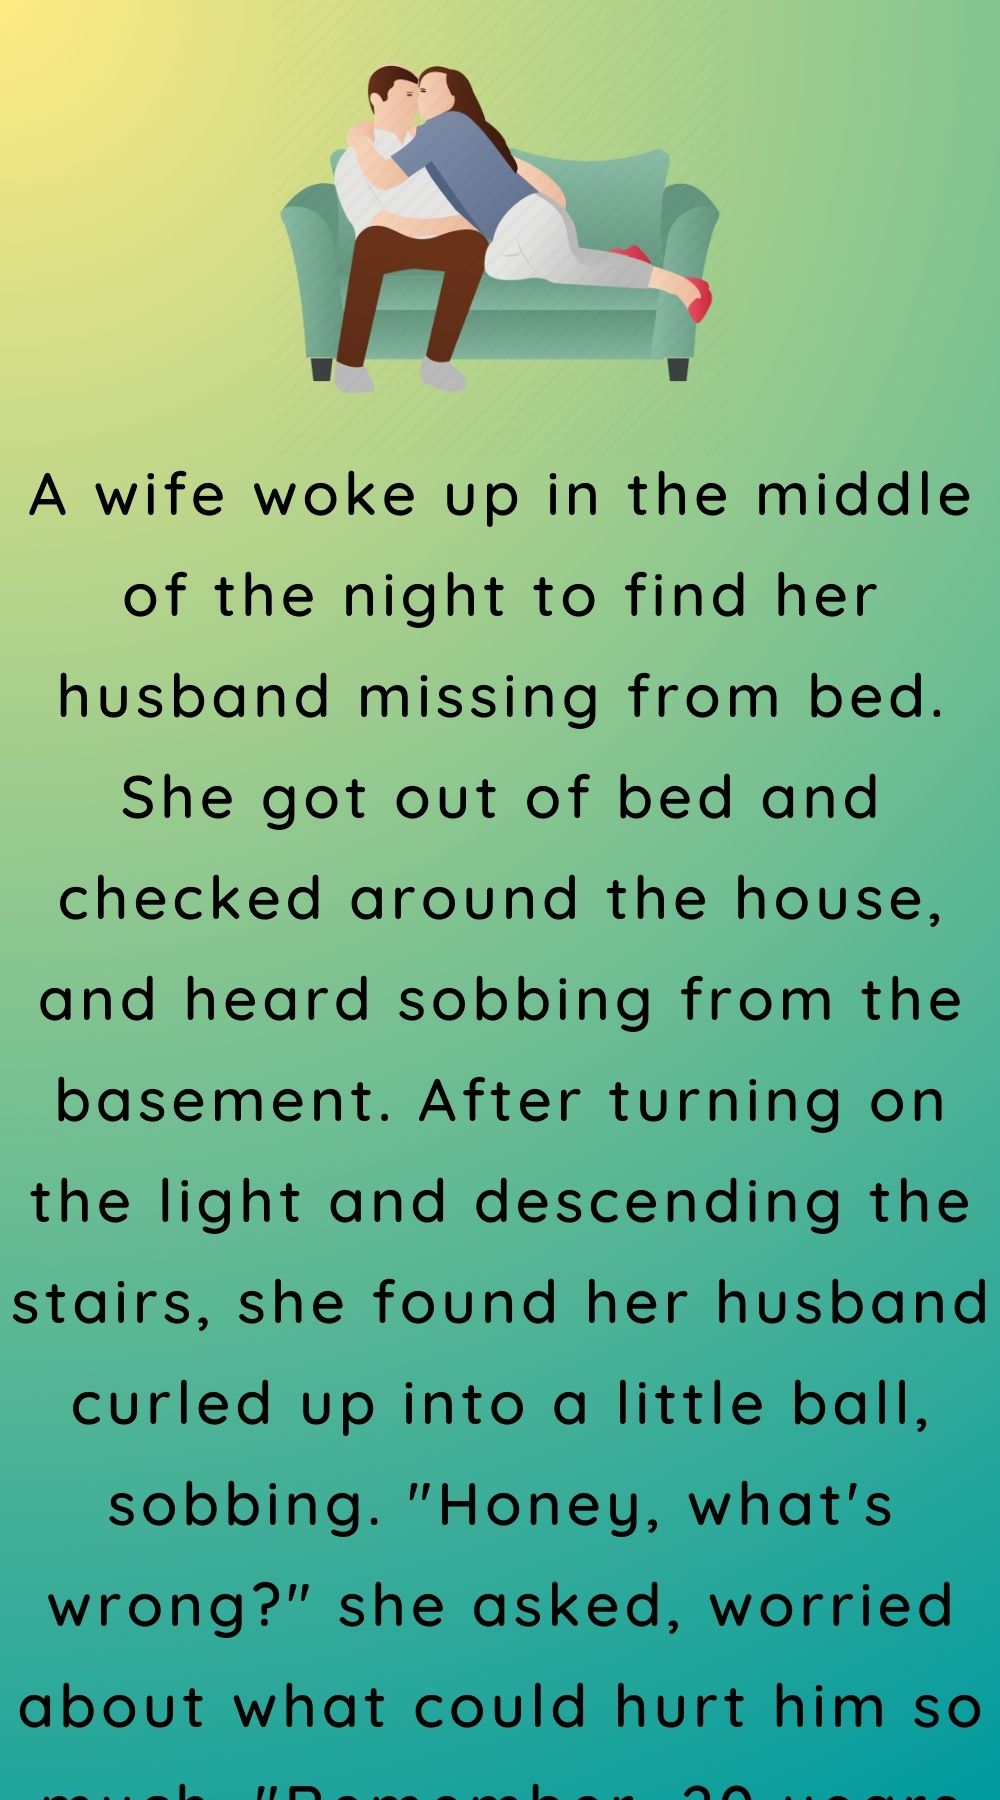 A wife woke up in the middle of the night 